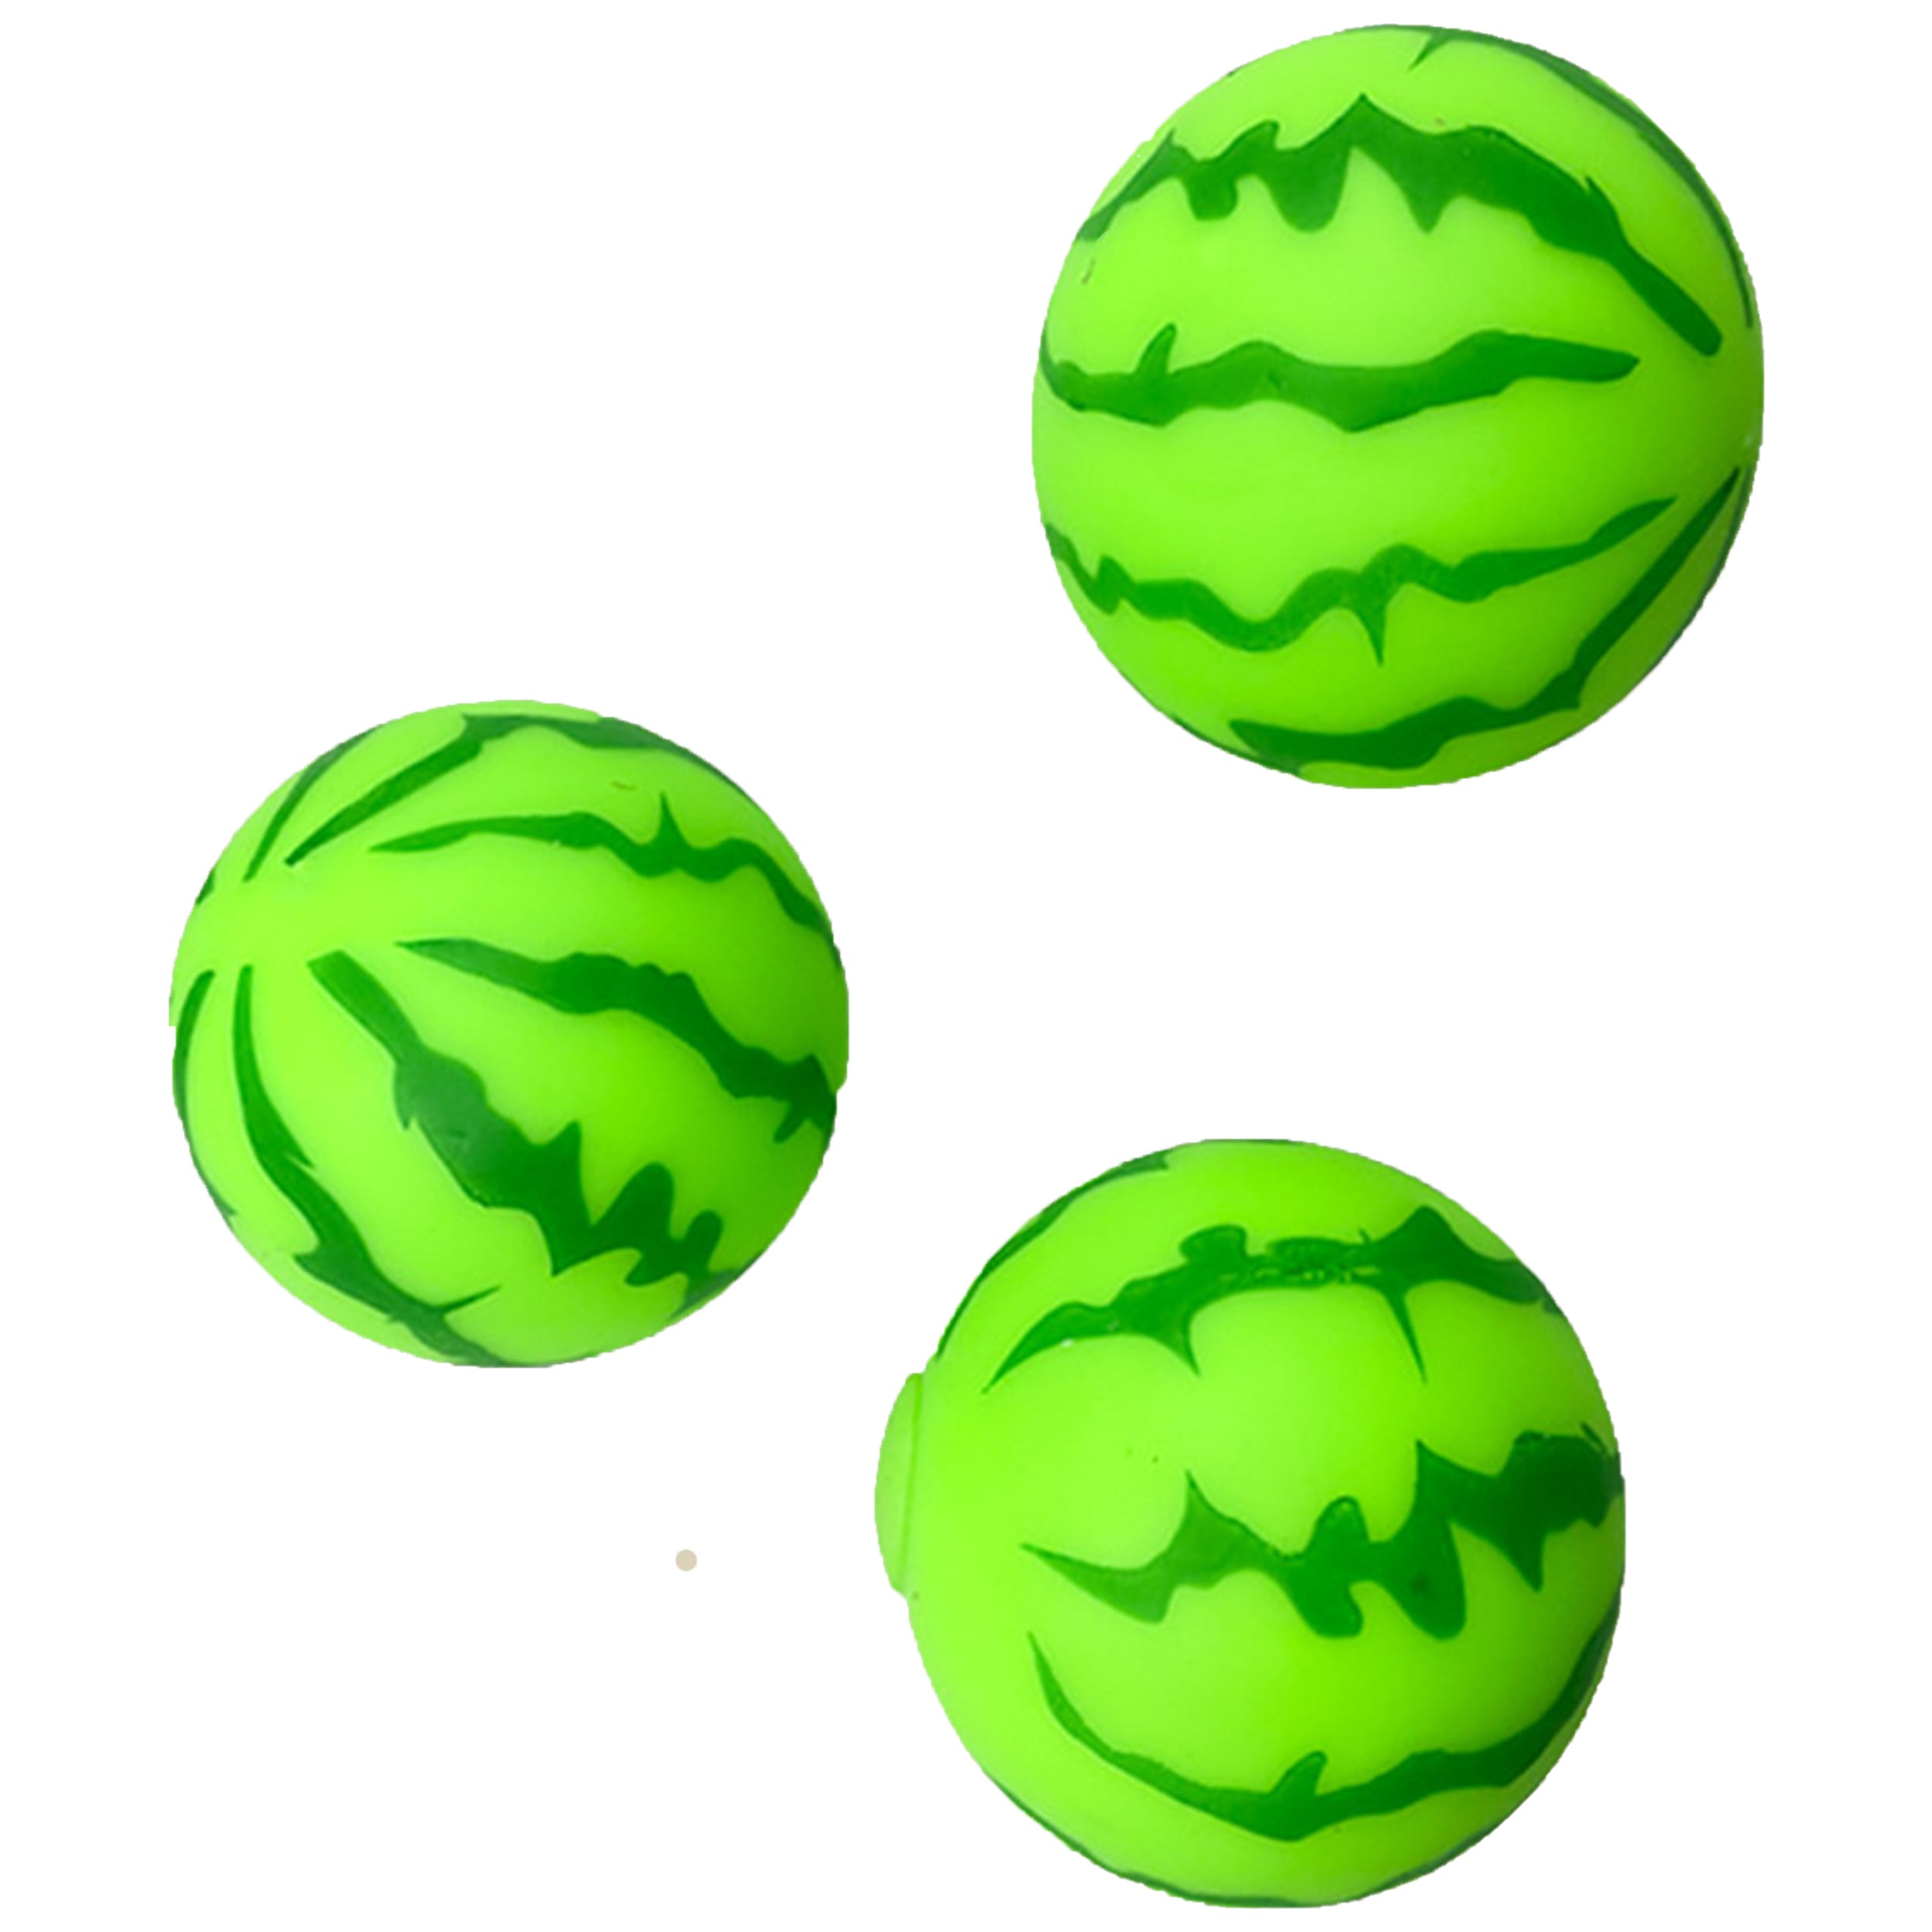 Squeeze Watermelon Ball Fidget Toys For Kids